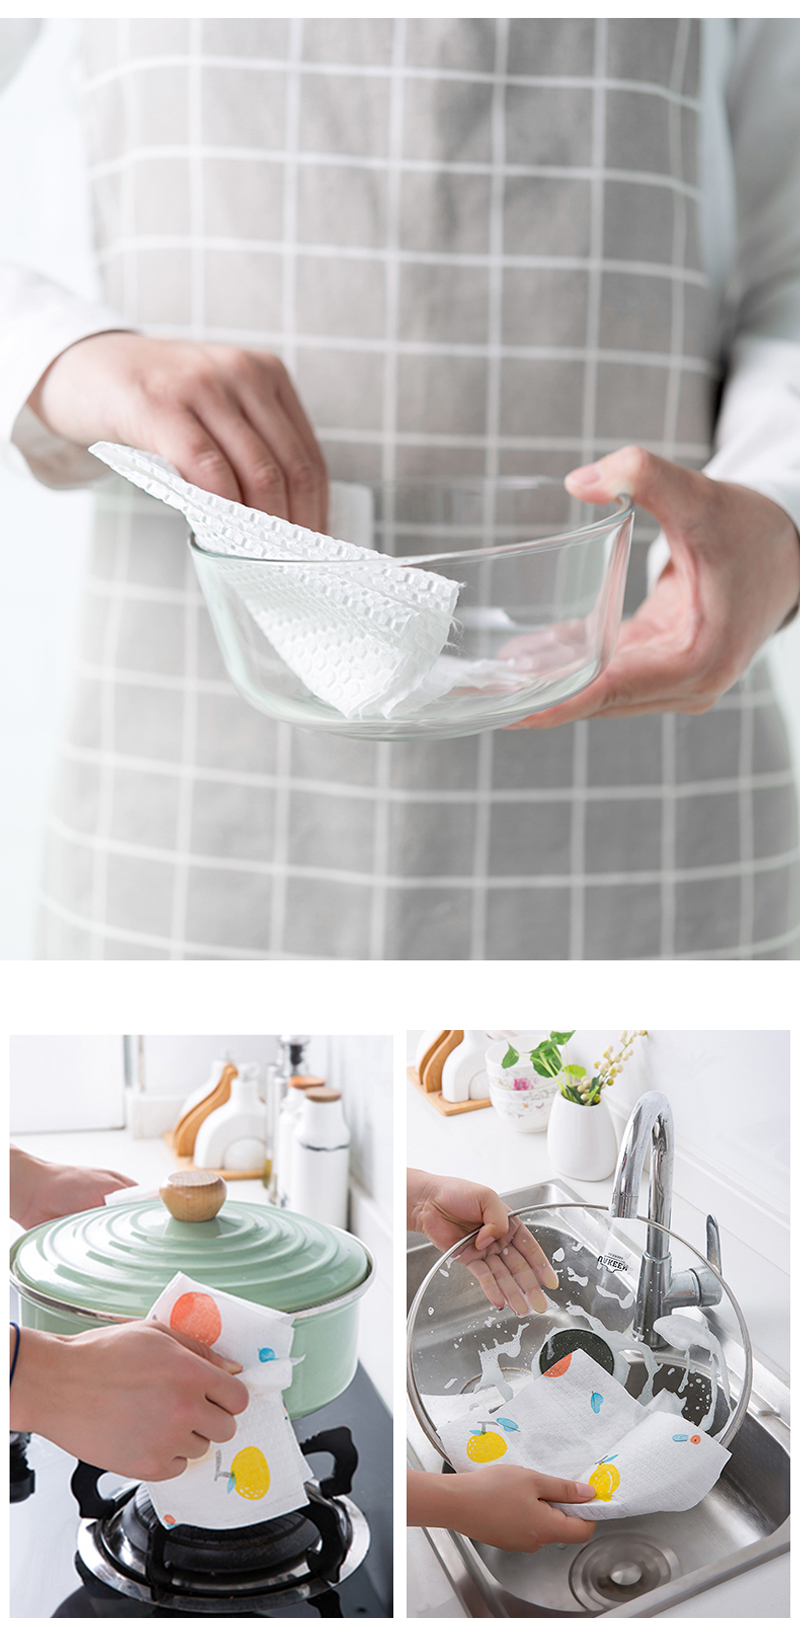 Disposable White Kitchen Cleaning Cloths